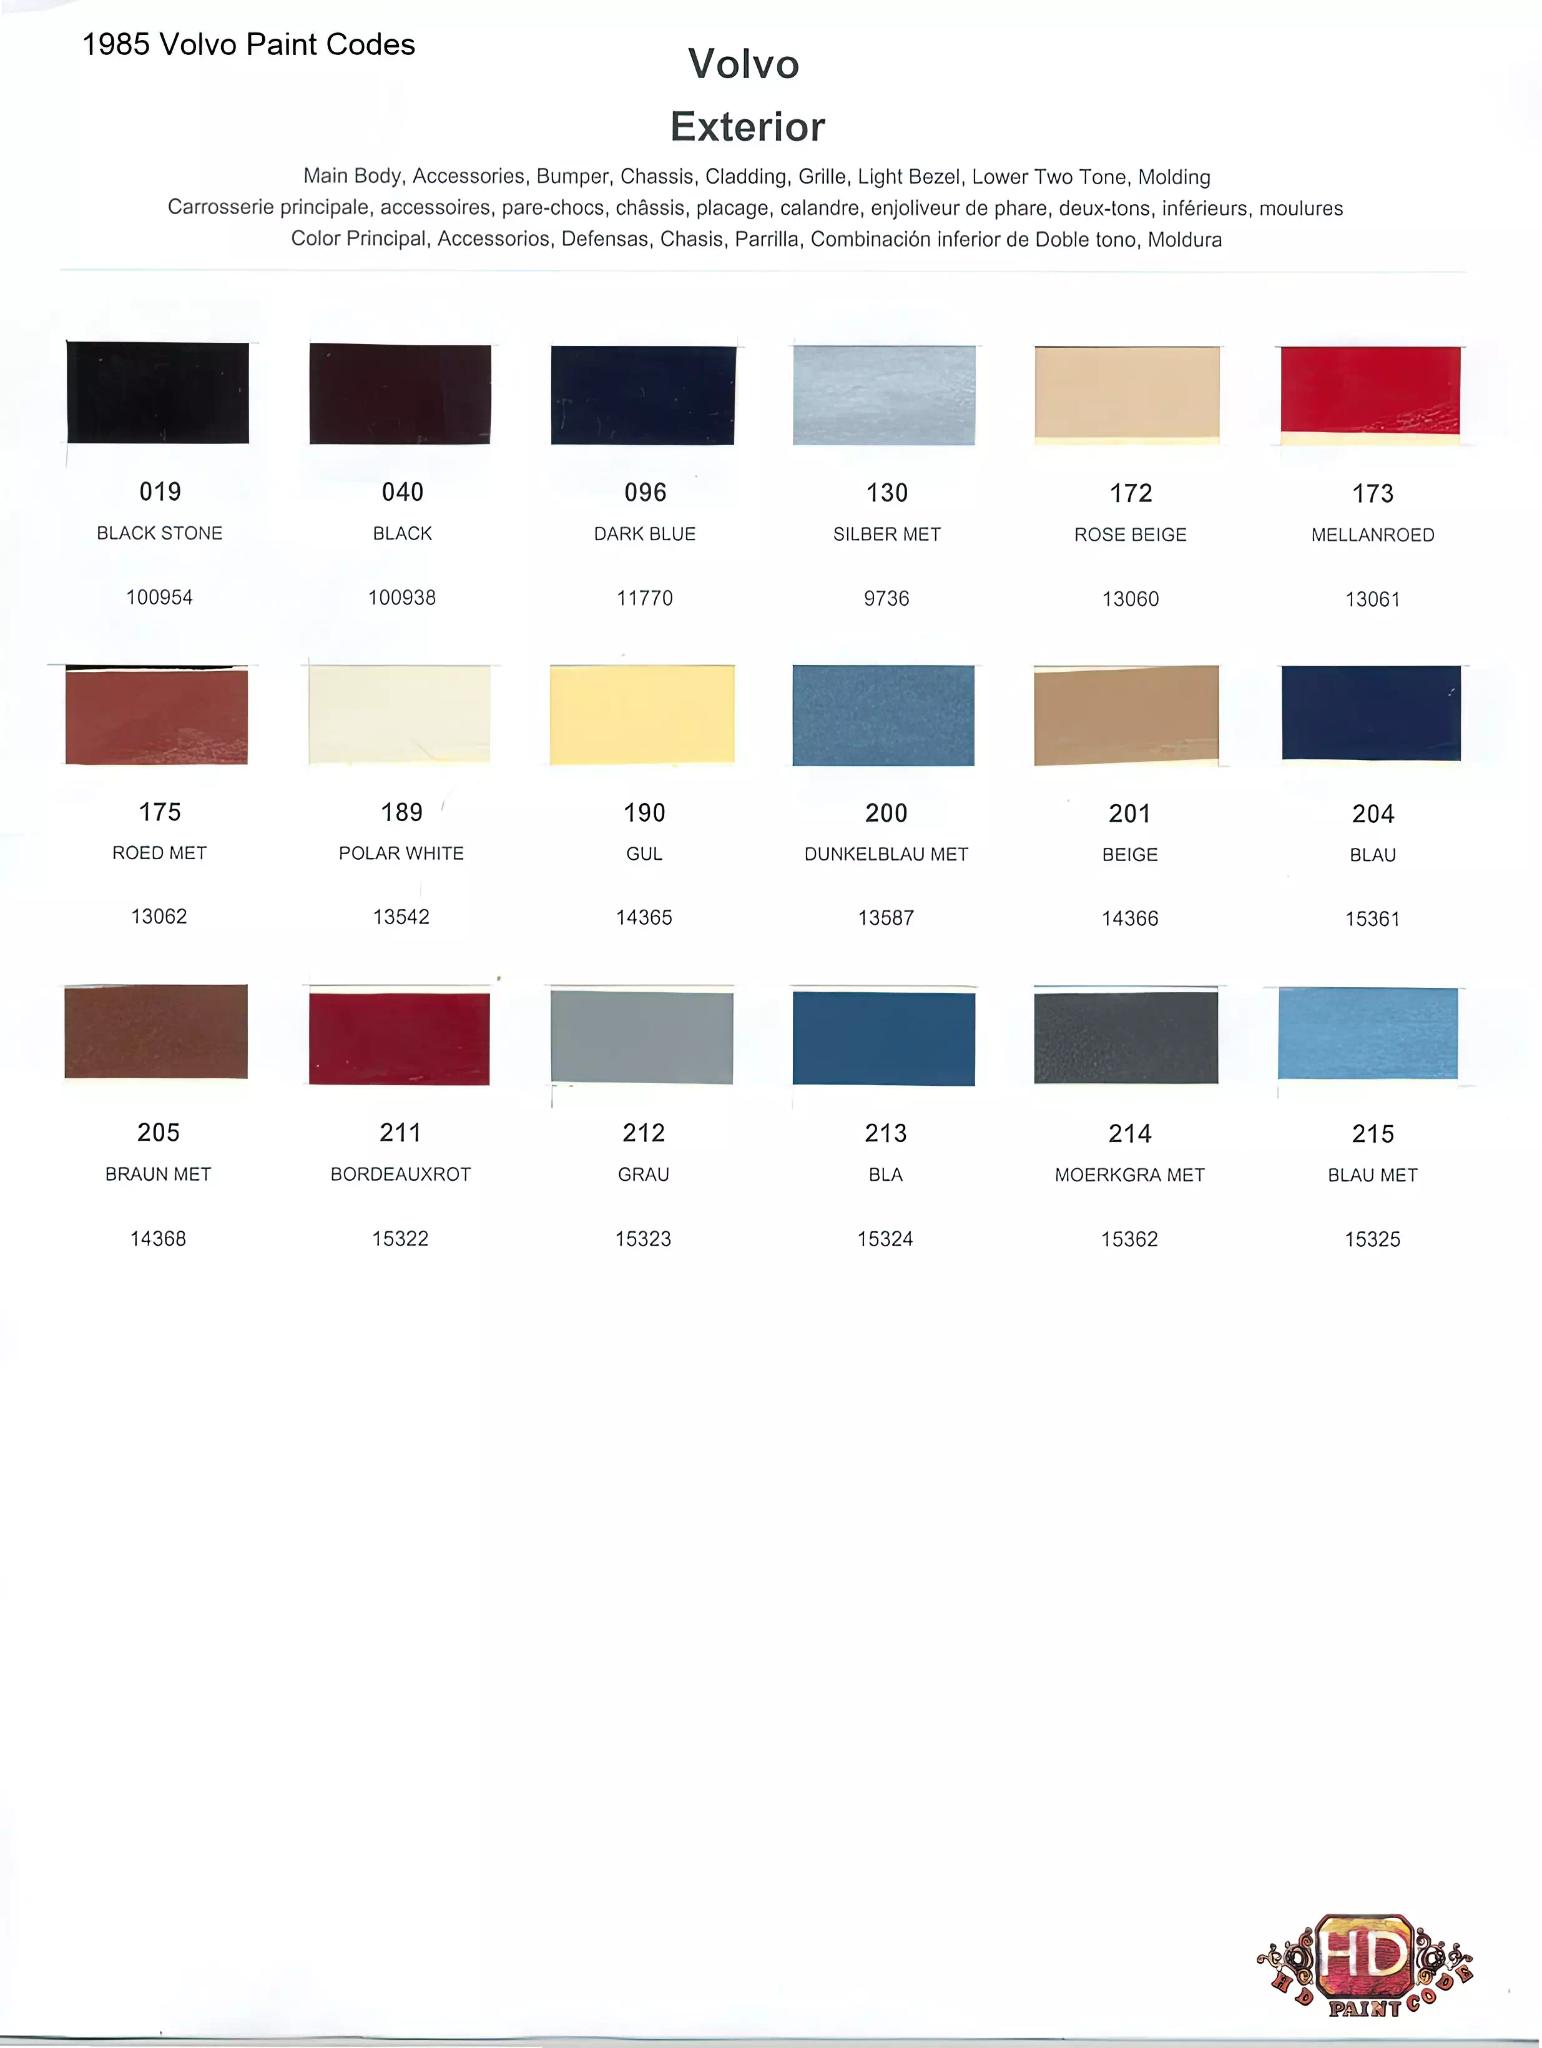 Oem numbers, Color names, rm and Glasurit stock numbers and color shade examples for 1985 Volvo exterior Paint Colors